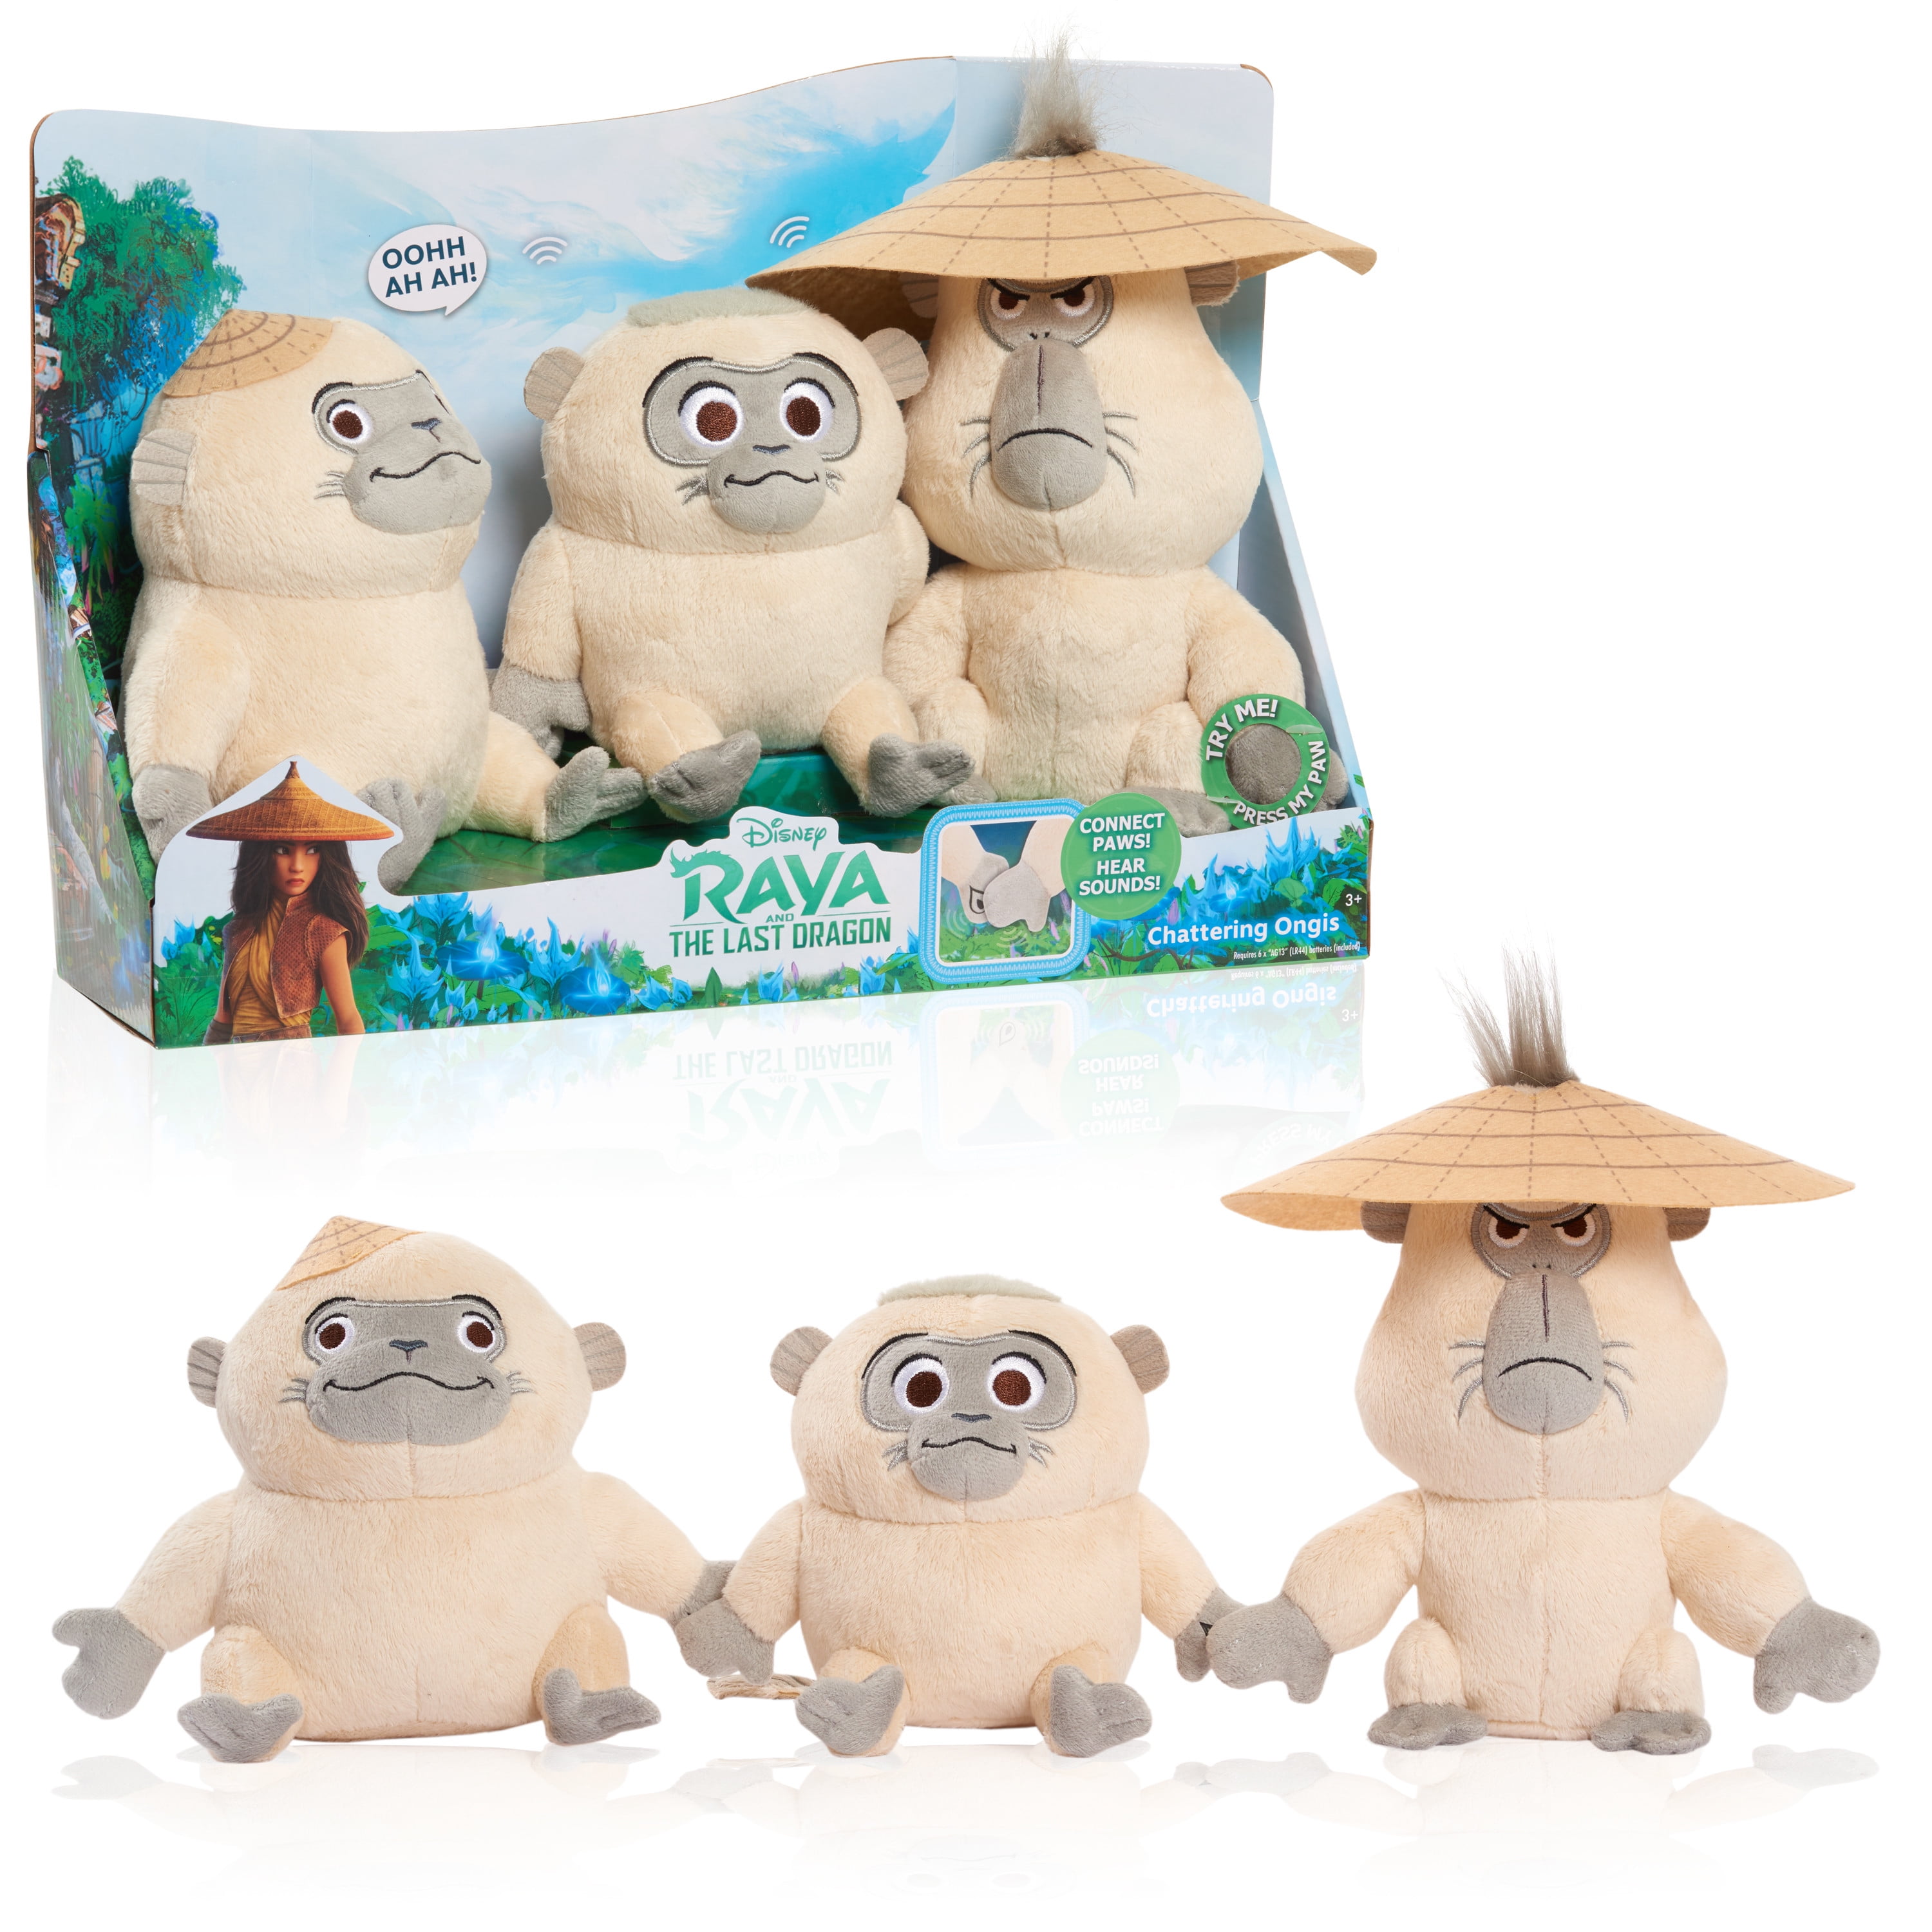 Disney Raya and the Last Dragon Chattering Ongis Plush, 3-piece set,  connecting stuffed animals with sound, Officially Licensed Kids Toys for  Ages 3 Up, Gifts and Presents 